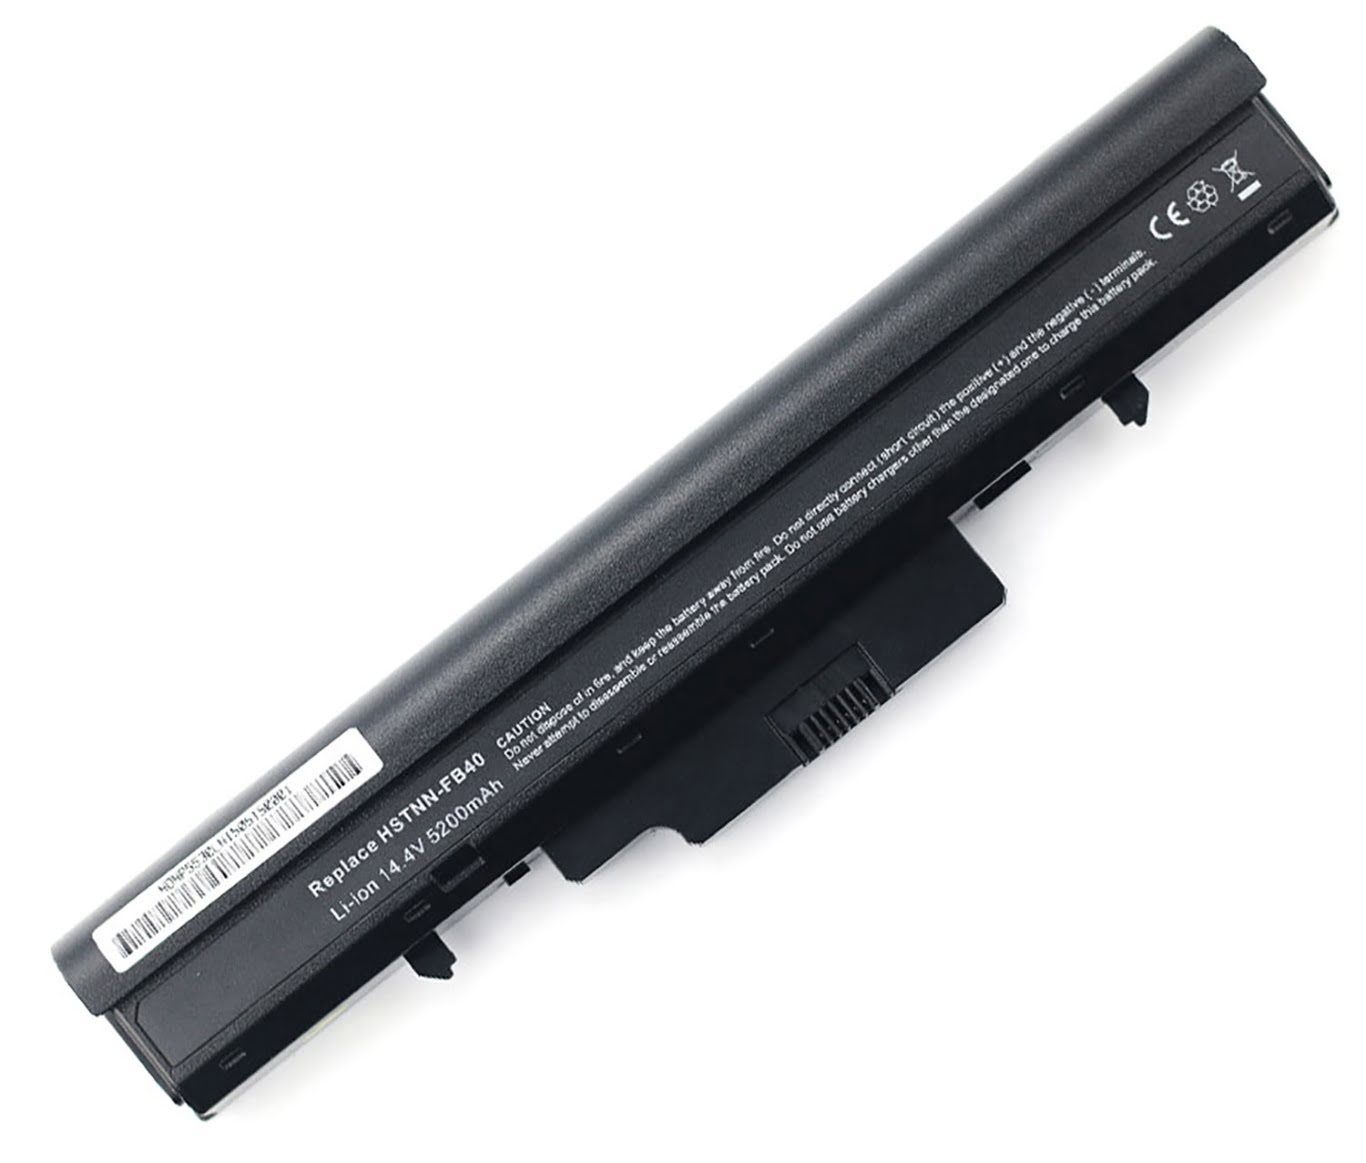 440264-ABC, 440265-ABC replacement Laptop Battery for HP 510, 530, 14.4V, 8 cells, 4400mAh